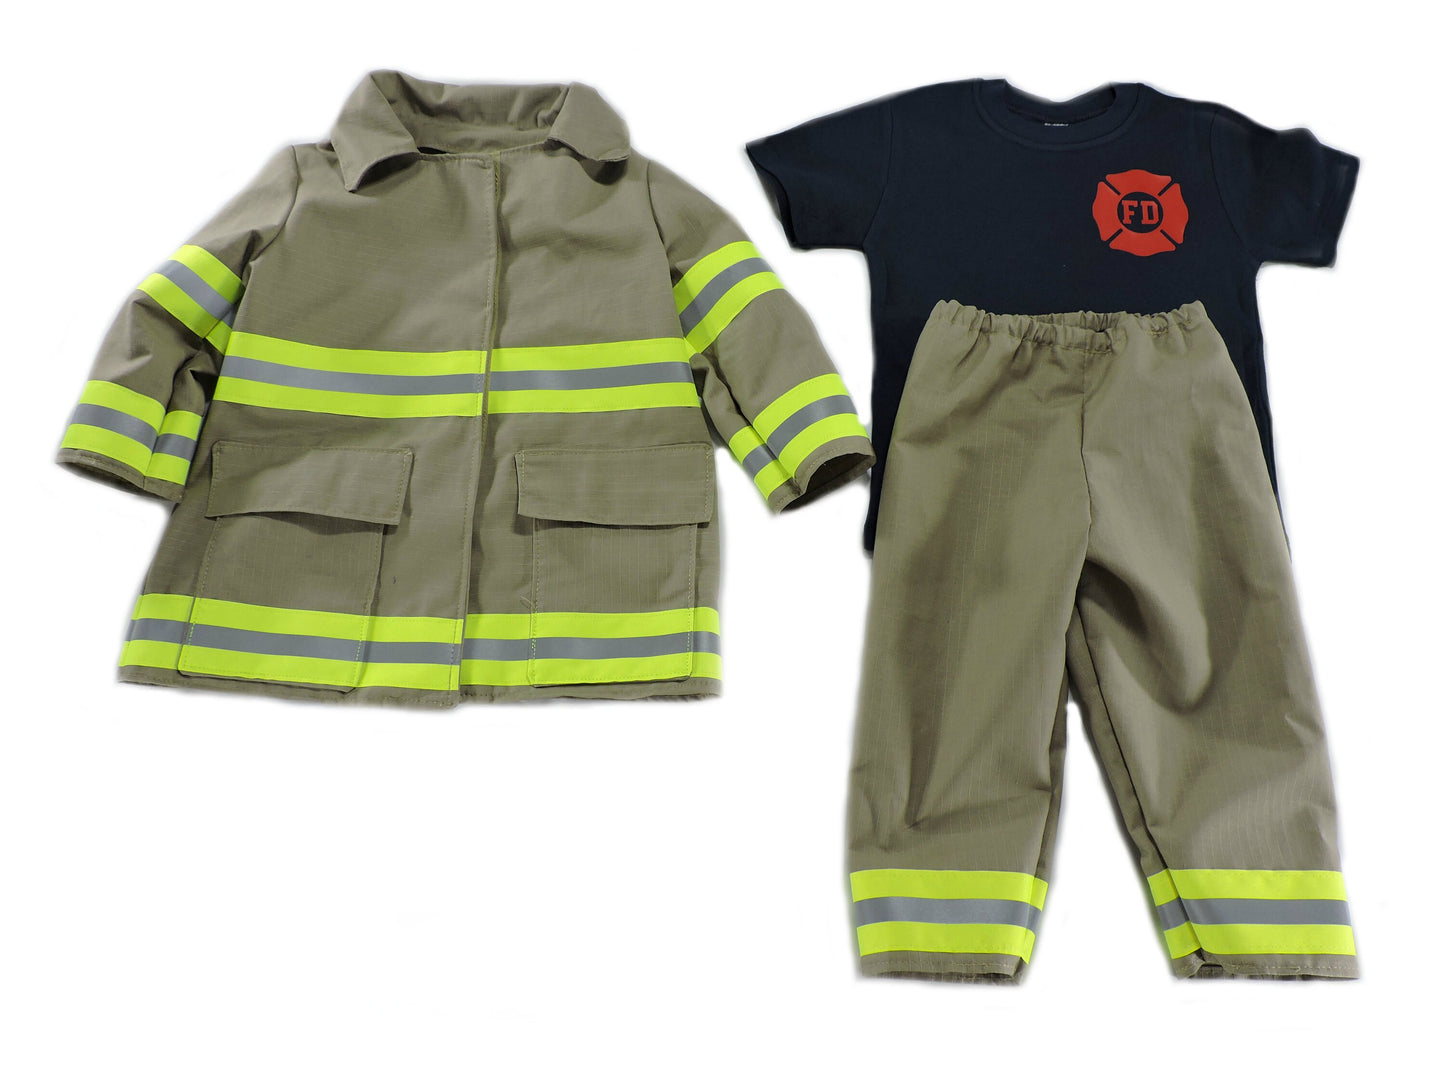 Tan fabric Firefighter toddler boy outfit and jacket